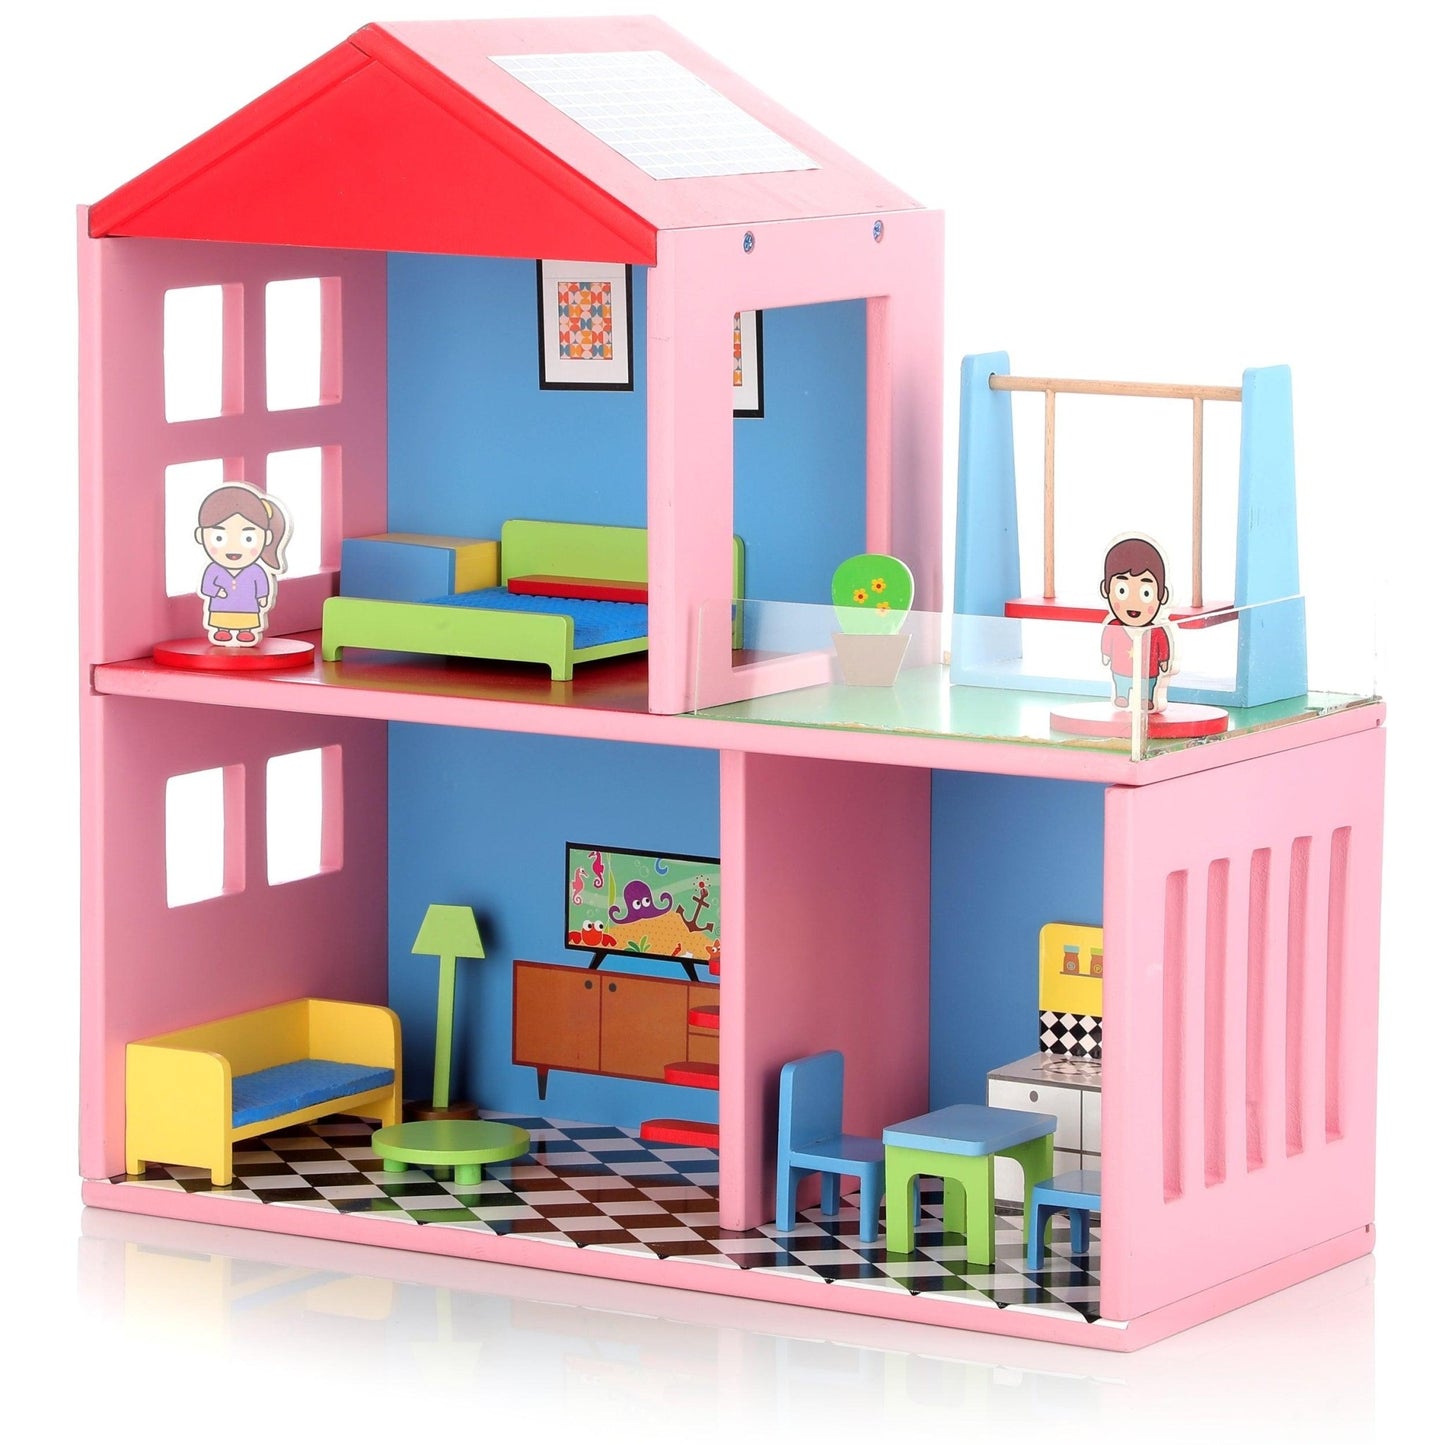 Chanak Wooden Doll House for Kids (16 Pieces) - chanak